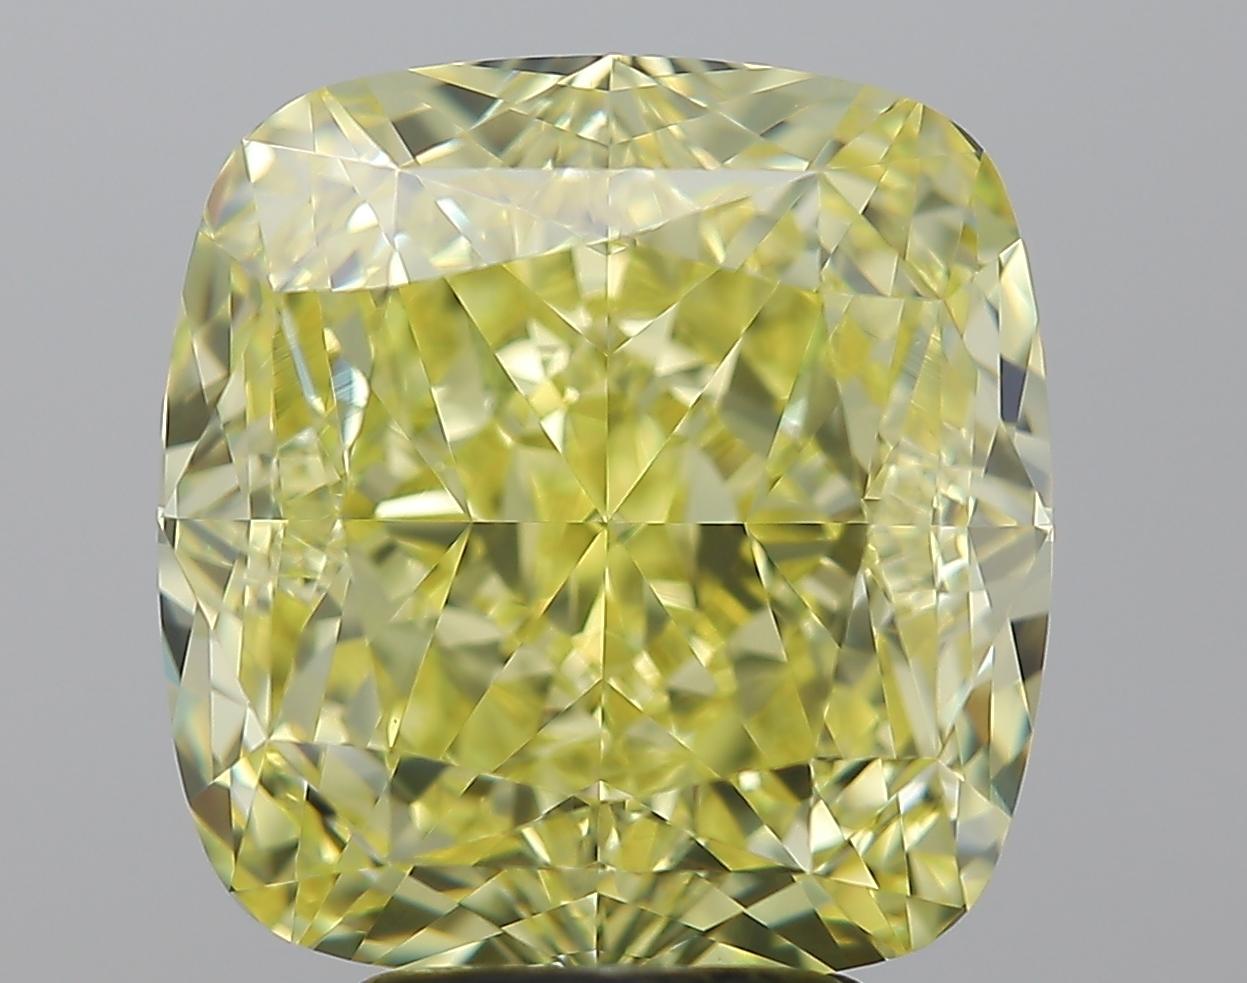 GIA Certified Diamond 4.00-4.10 Carat VVS, Fancy Intense Yellow, Cushion Cut

Perfect Yellow Color Diamonds for perfect gifts. 
Beautiful Canary Yellow with great Sparkle & Fire.

5 C's:
Certificate: GIA
Carat: 4.00-4.10ct
Color: Natural Fancy